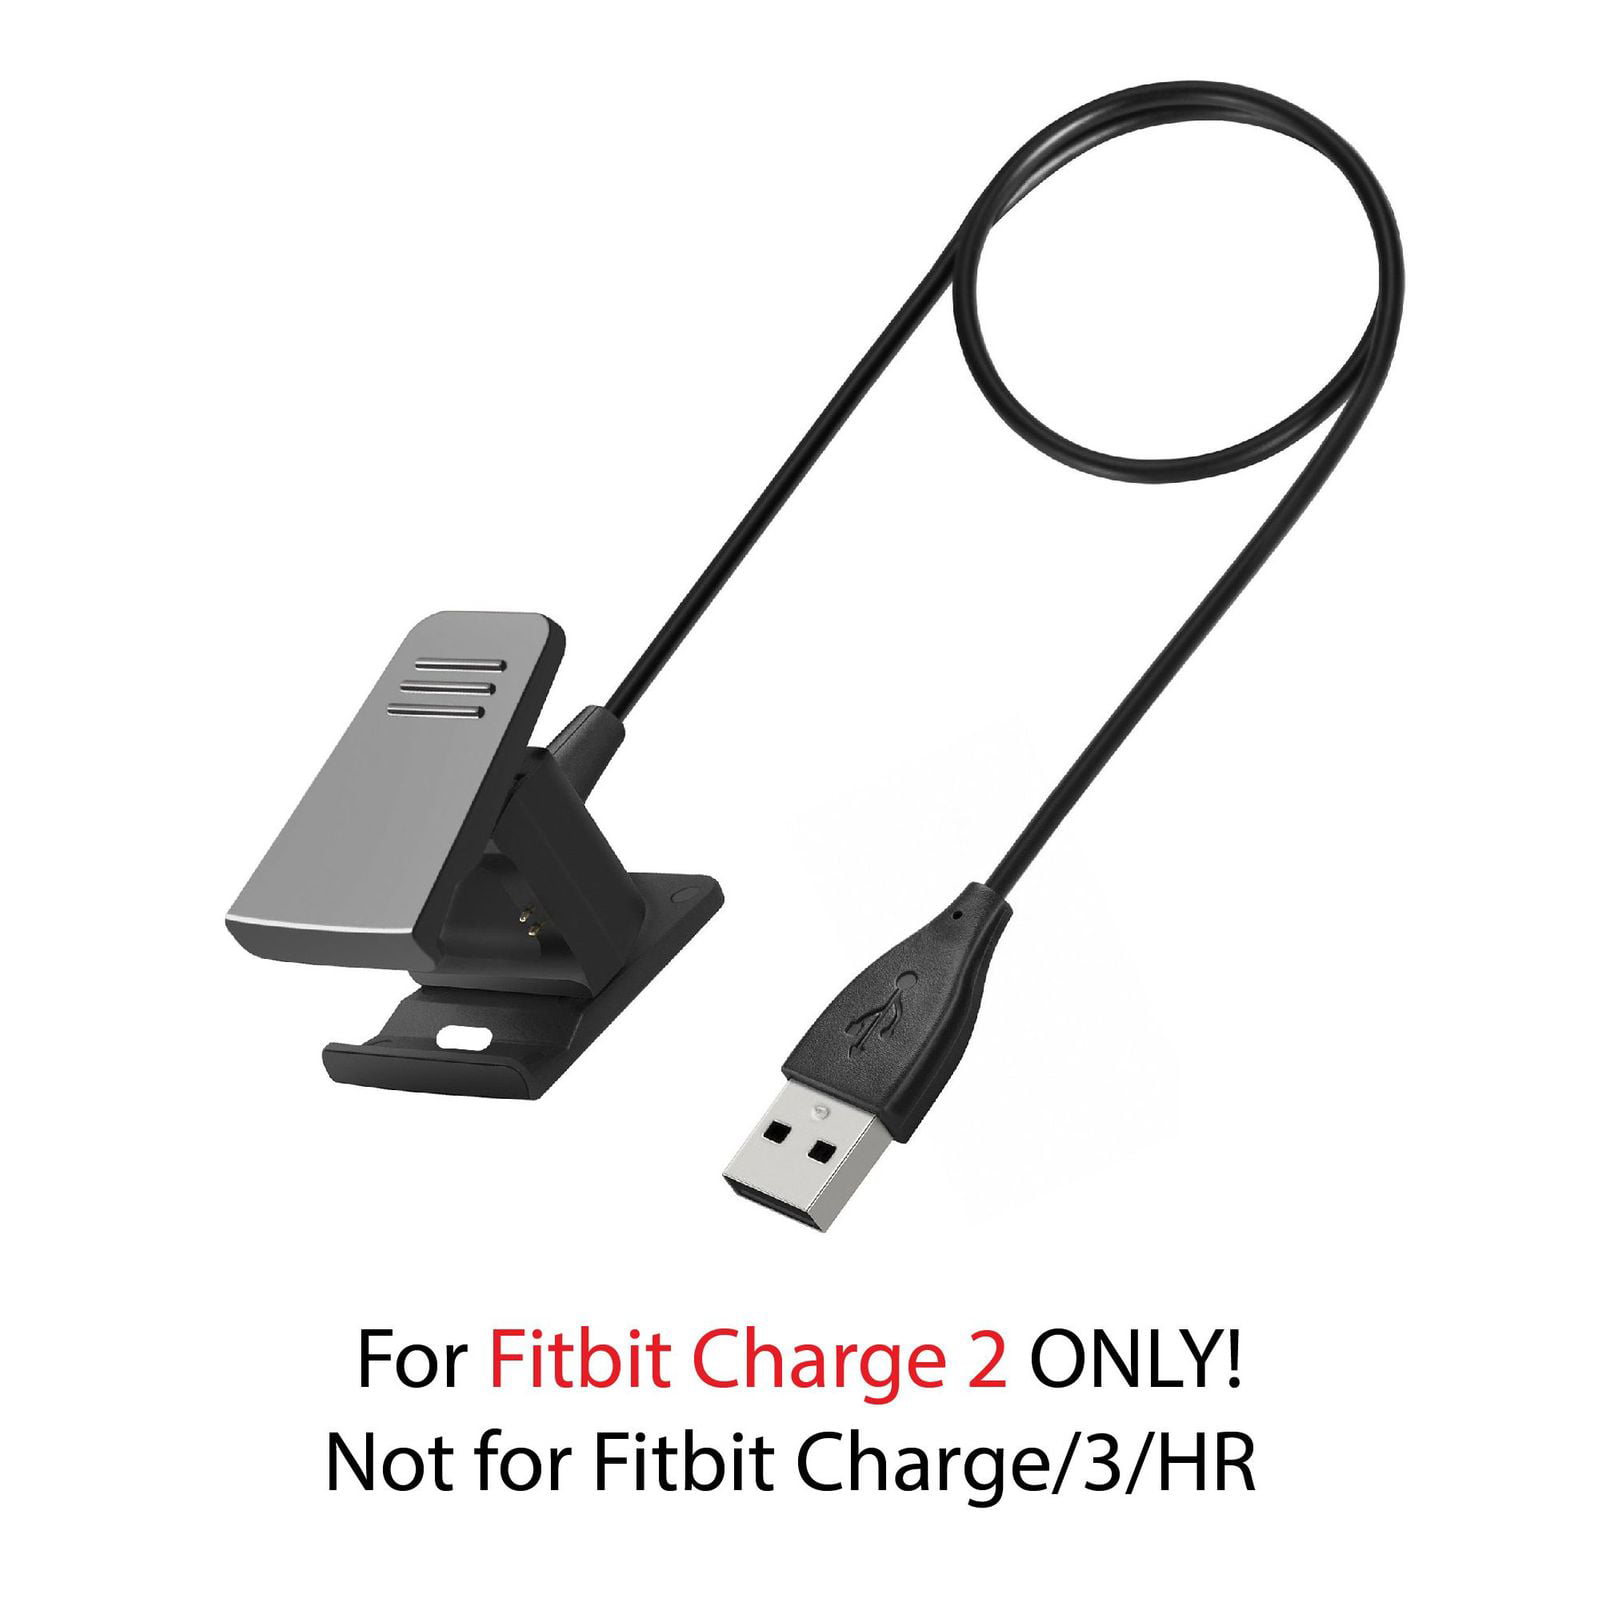 2 Chargers For Fitbit CHARGE HR Wireless Activity Wristband Cable Cord USB NEW 